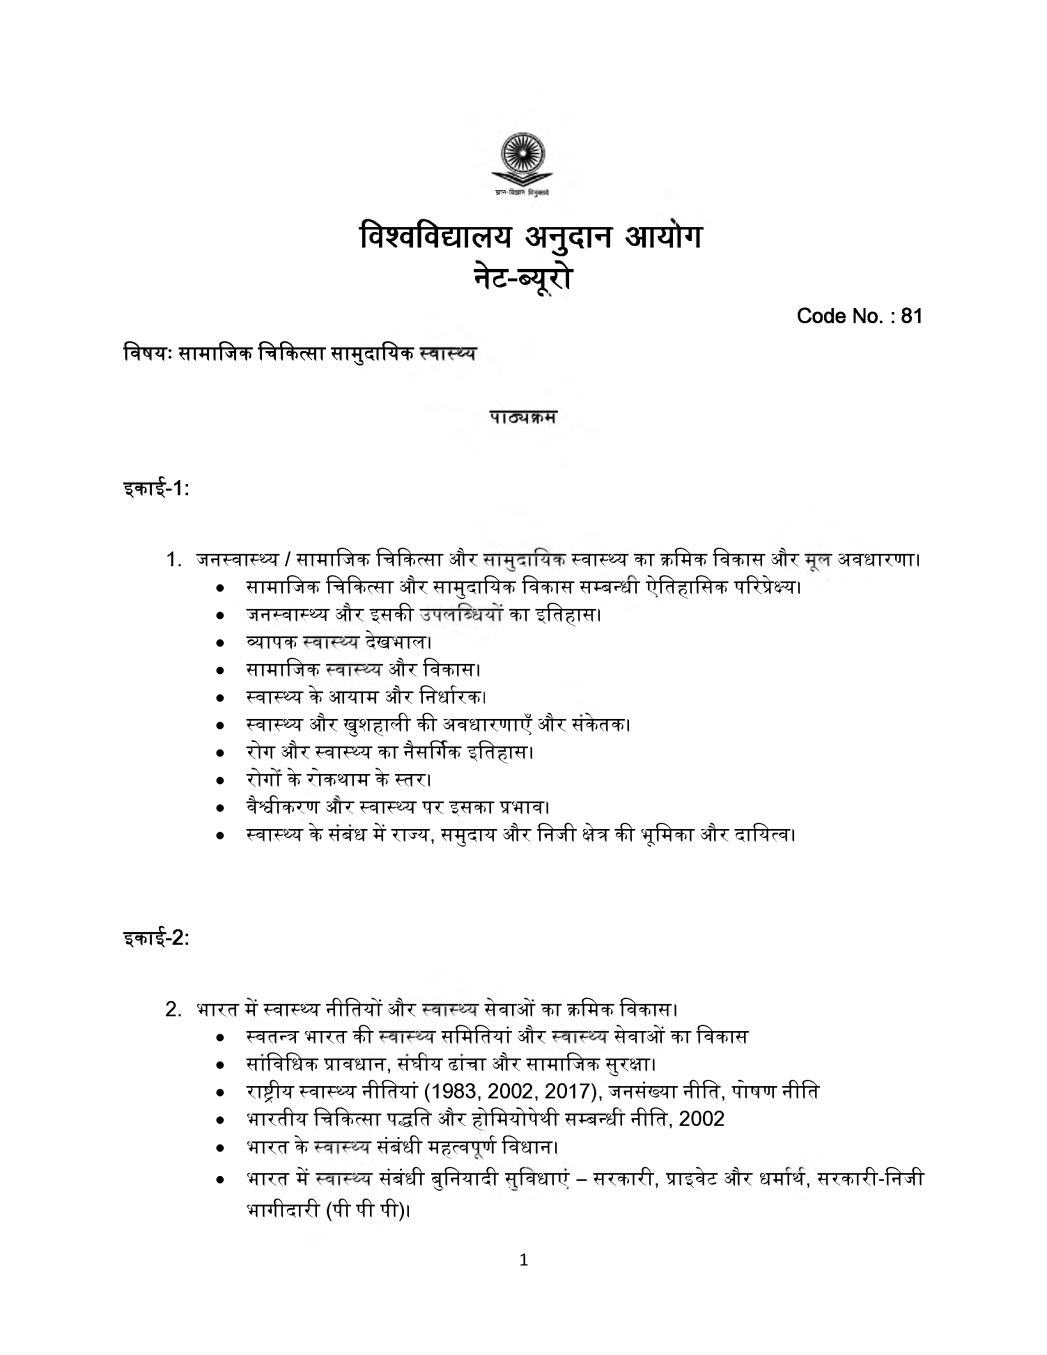 UGC NET Syllabus for Social Medicine and Community Health 2020 in Hindi - Page 1